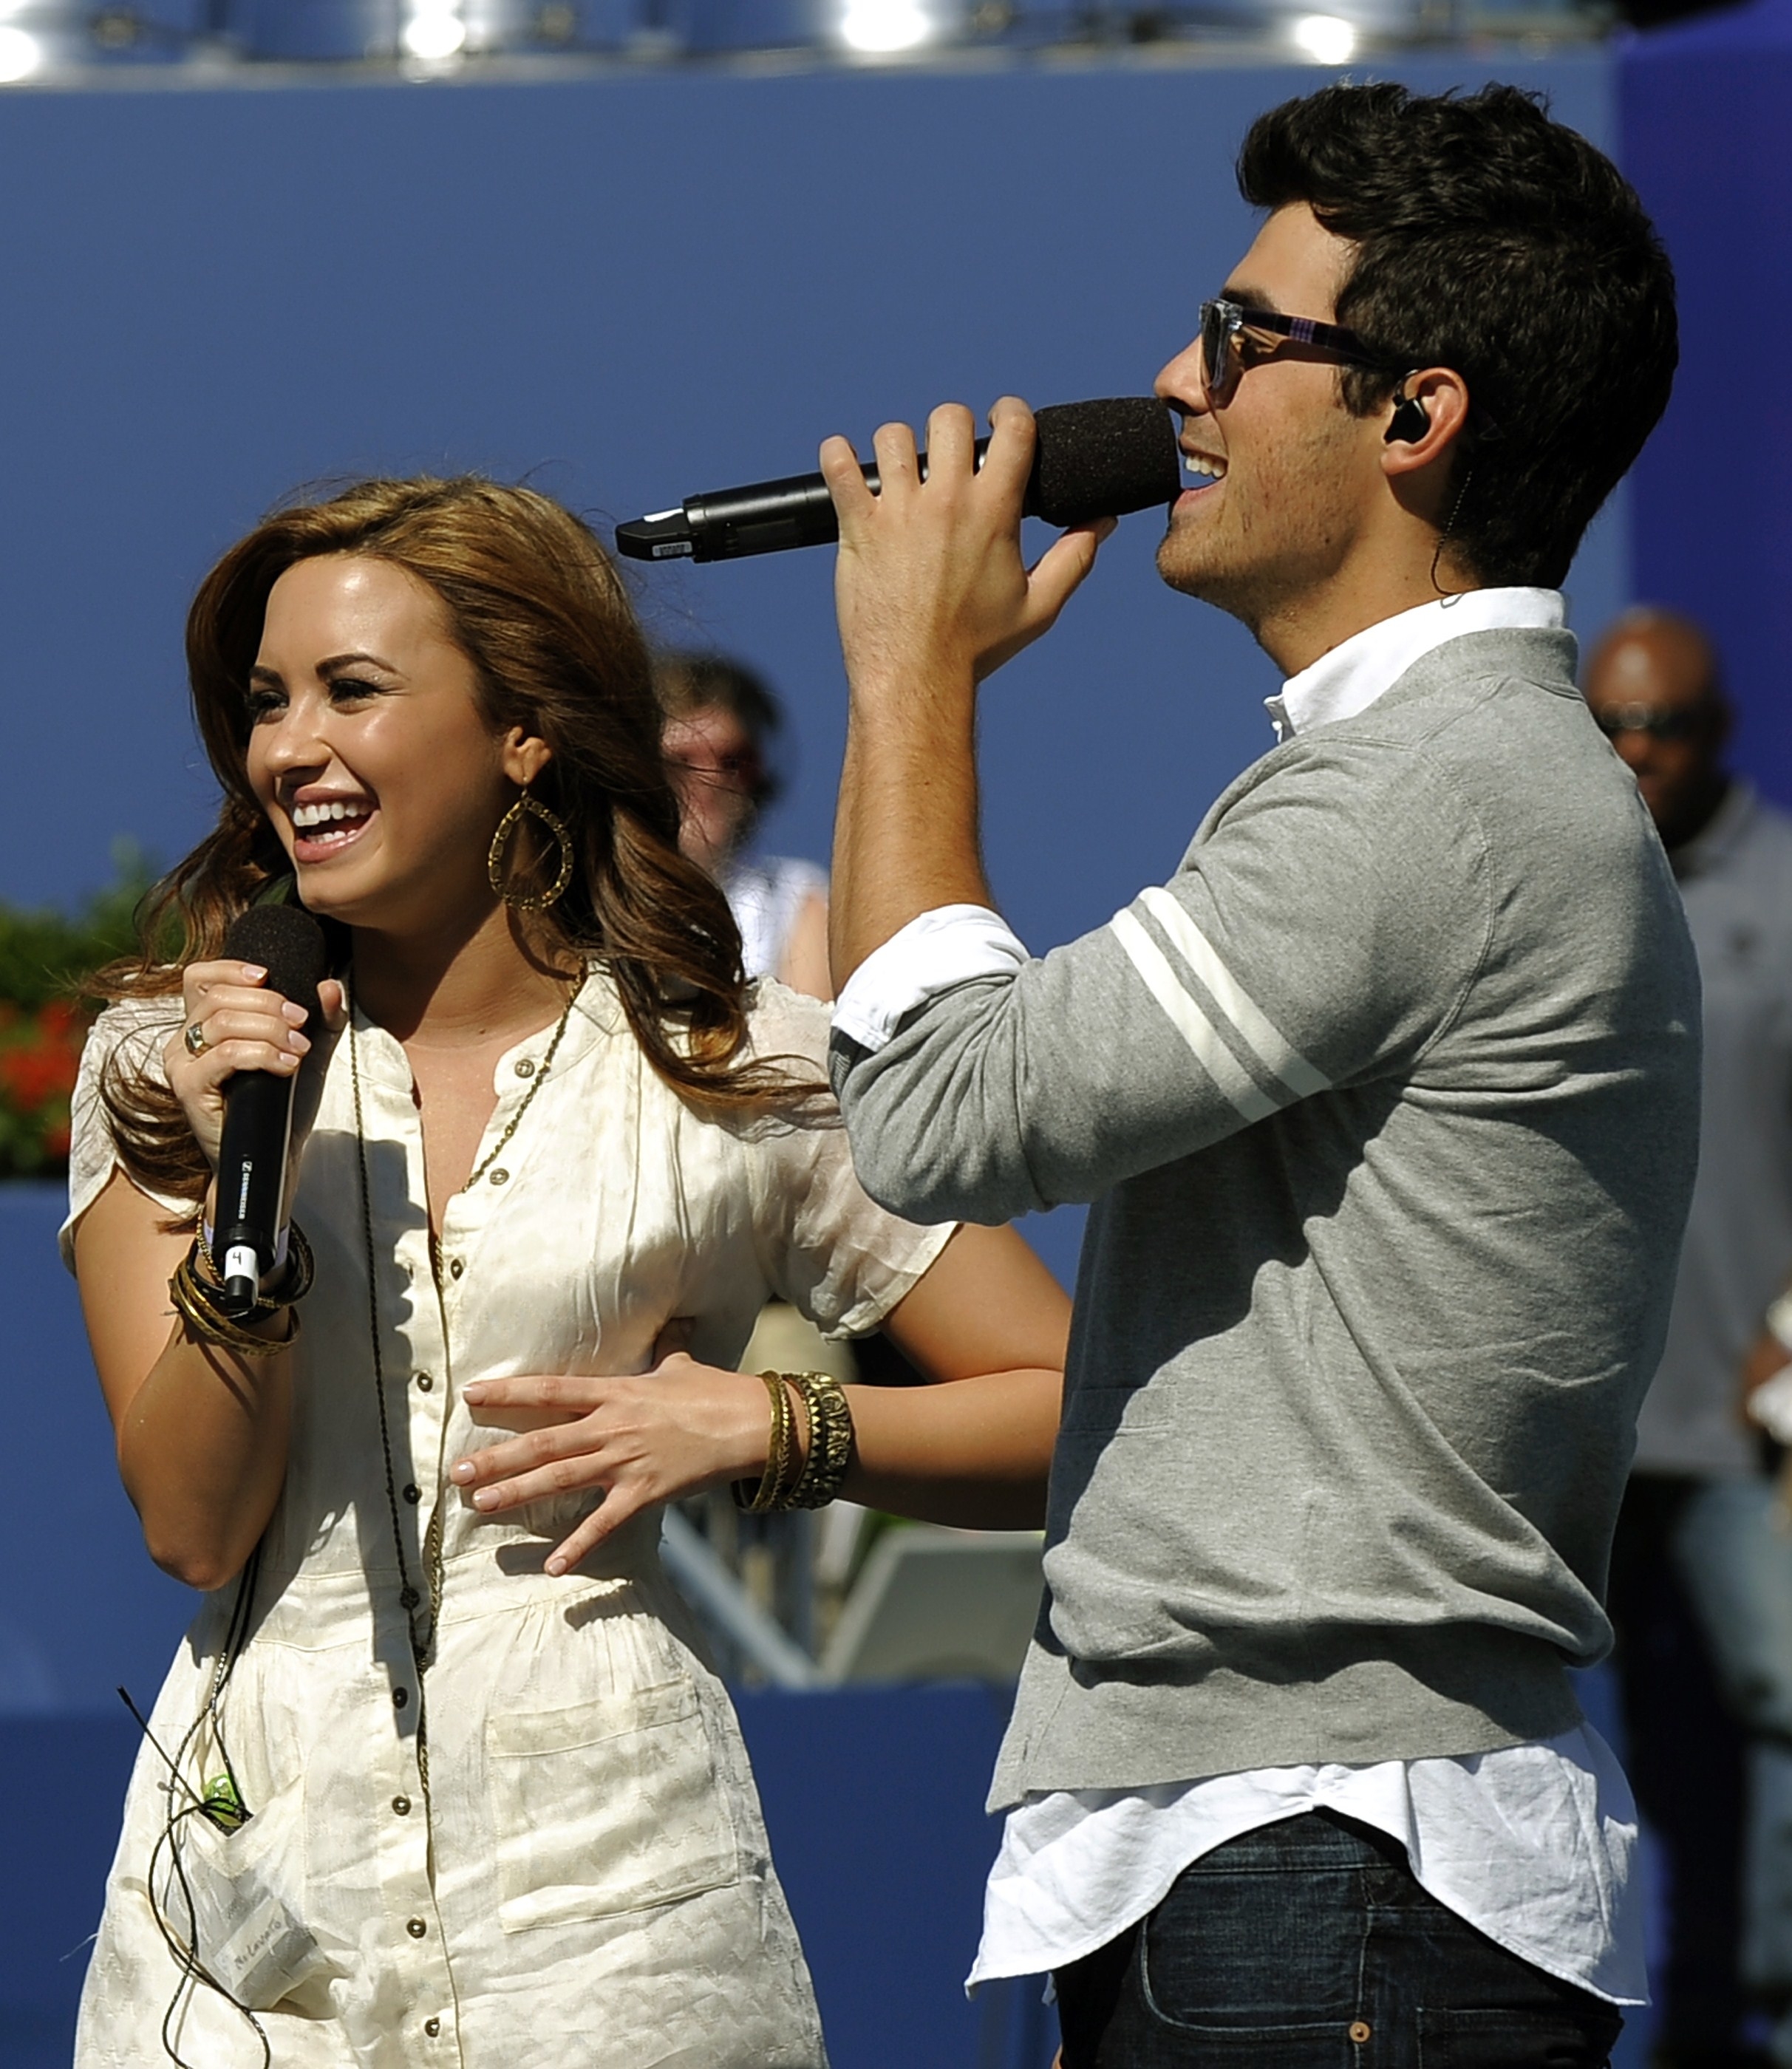 Demi Lovato and Joe Jonas holding microphones and performing together on the court at the US Open